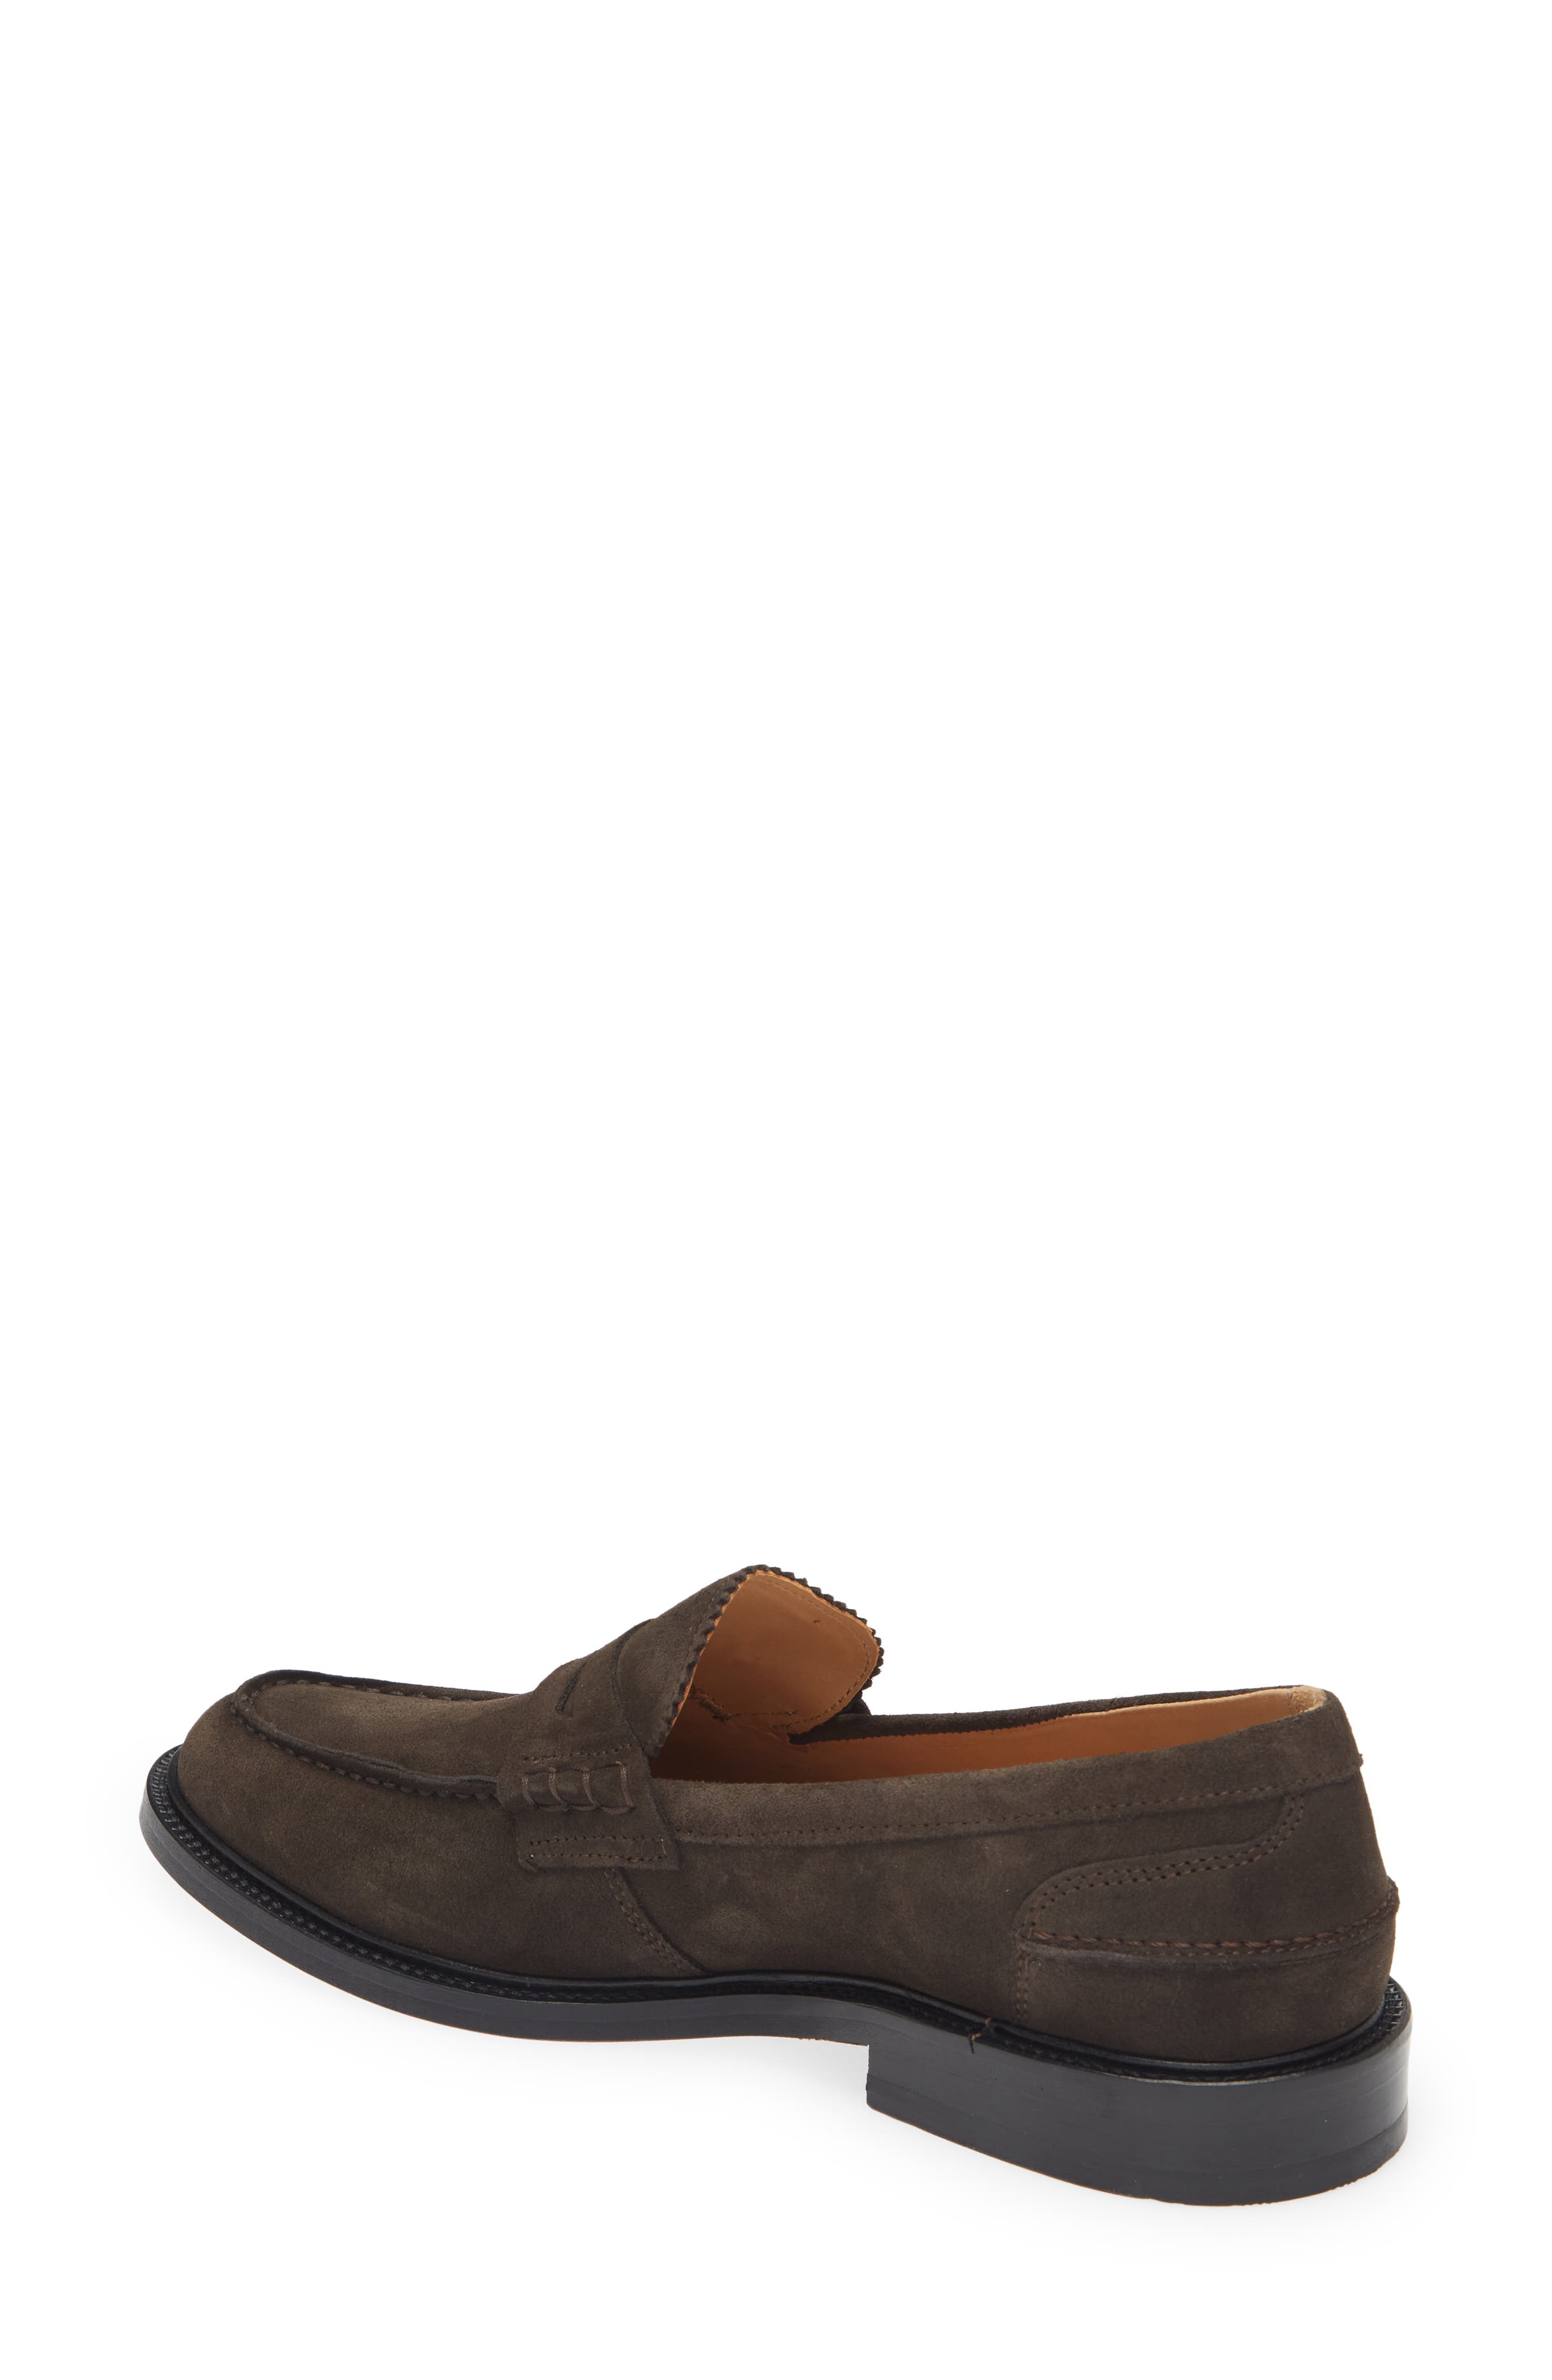 Brown VINNYS Suede Vinnys Townee Penny Loafer in Brown Suede for Men Mens Shoes Slip-on shoes Loafers 